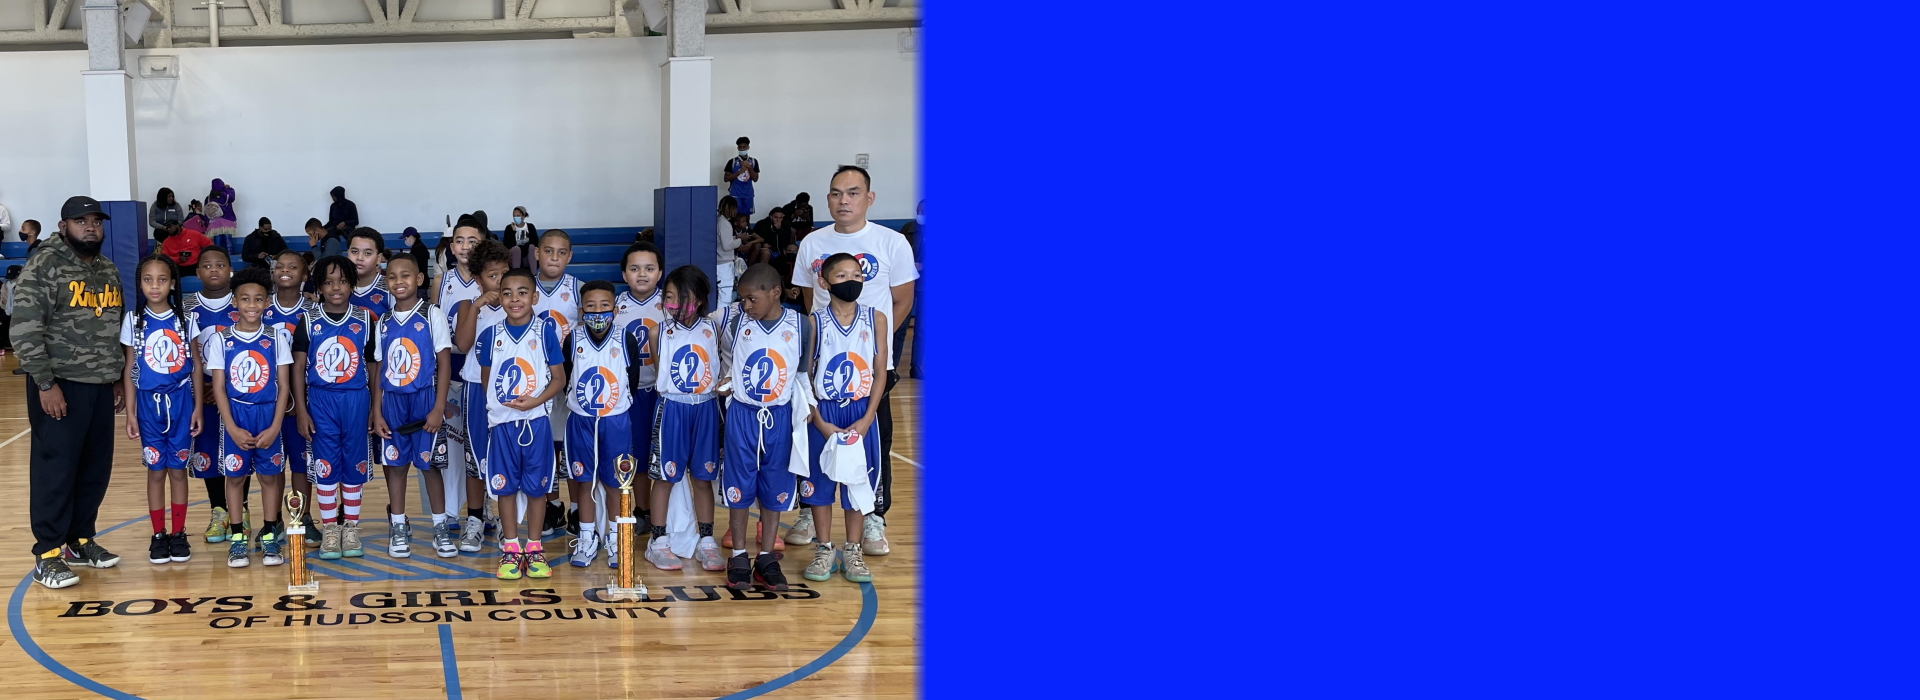 4th grade champions and runners up